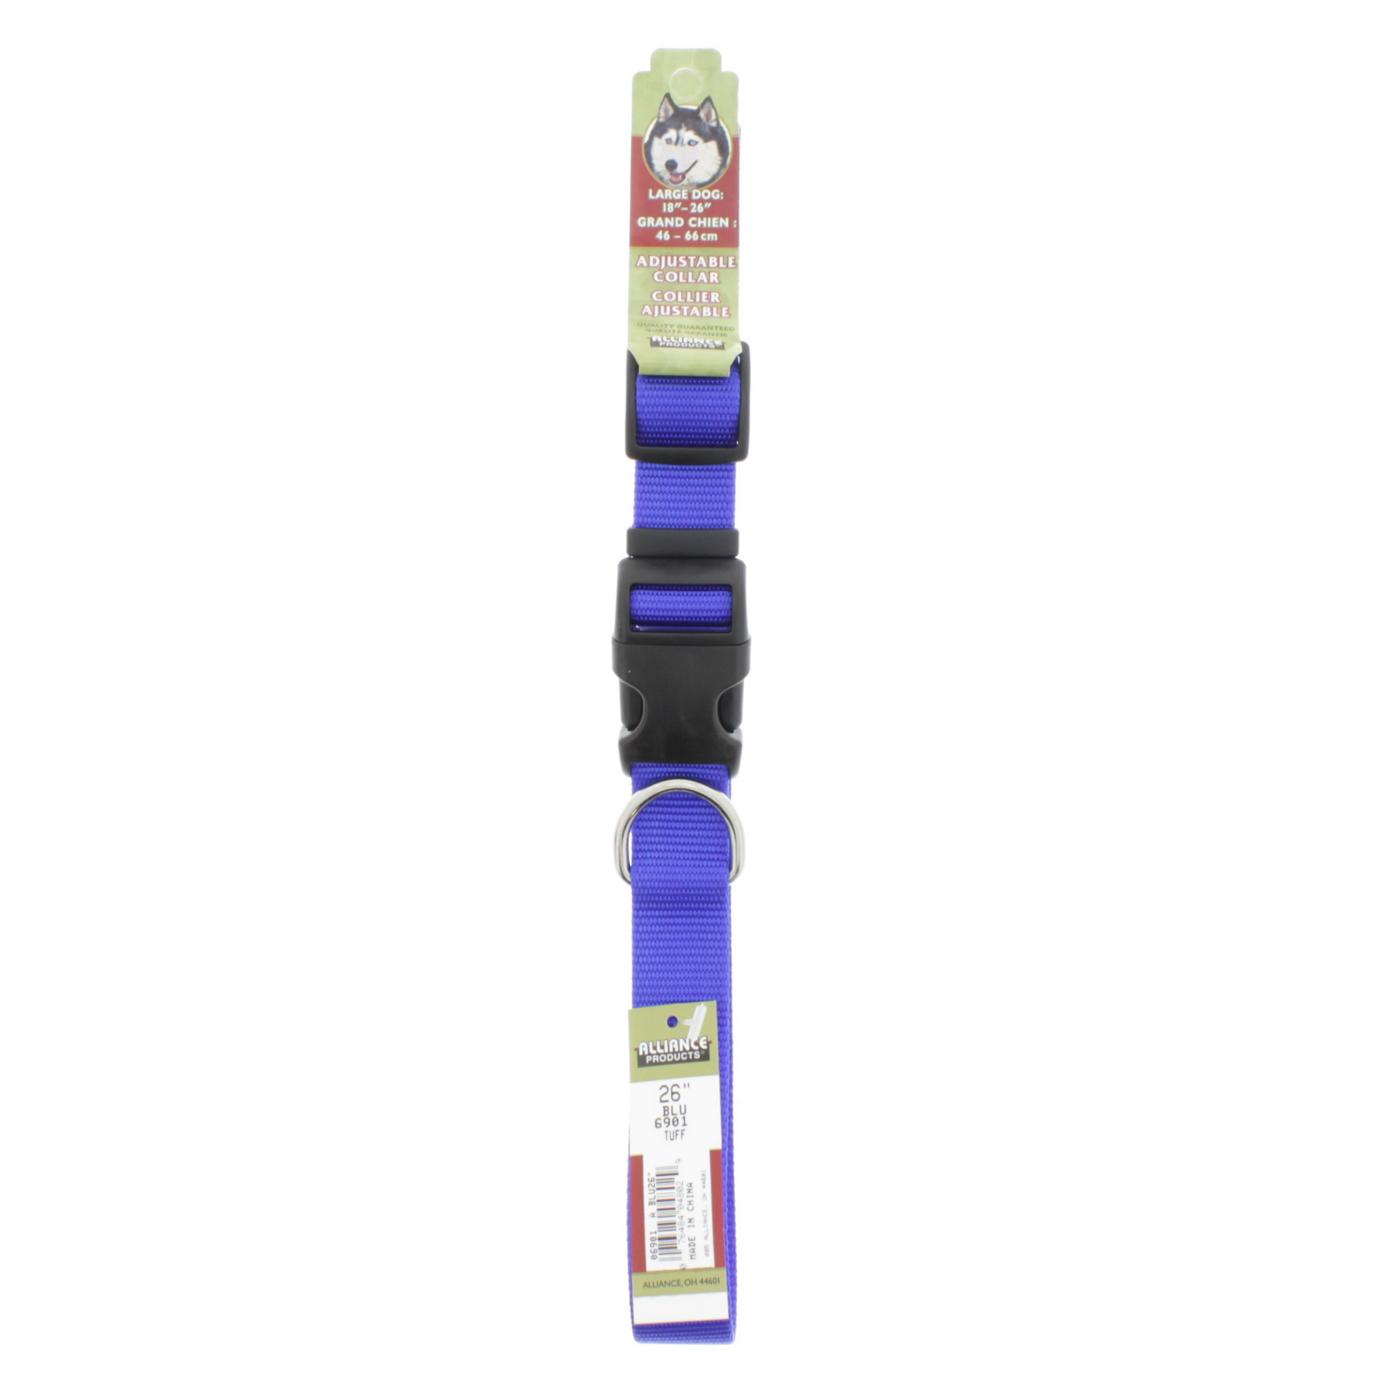 Coastal Pet Products Nylon Adjustable Collar, Assorted Colors; image 1 of 2